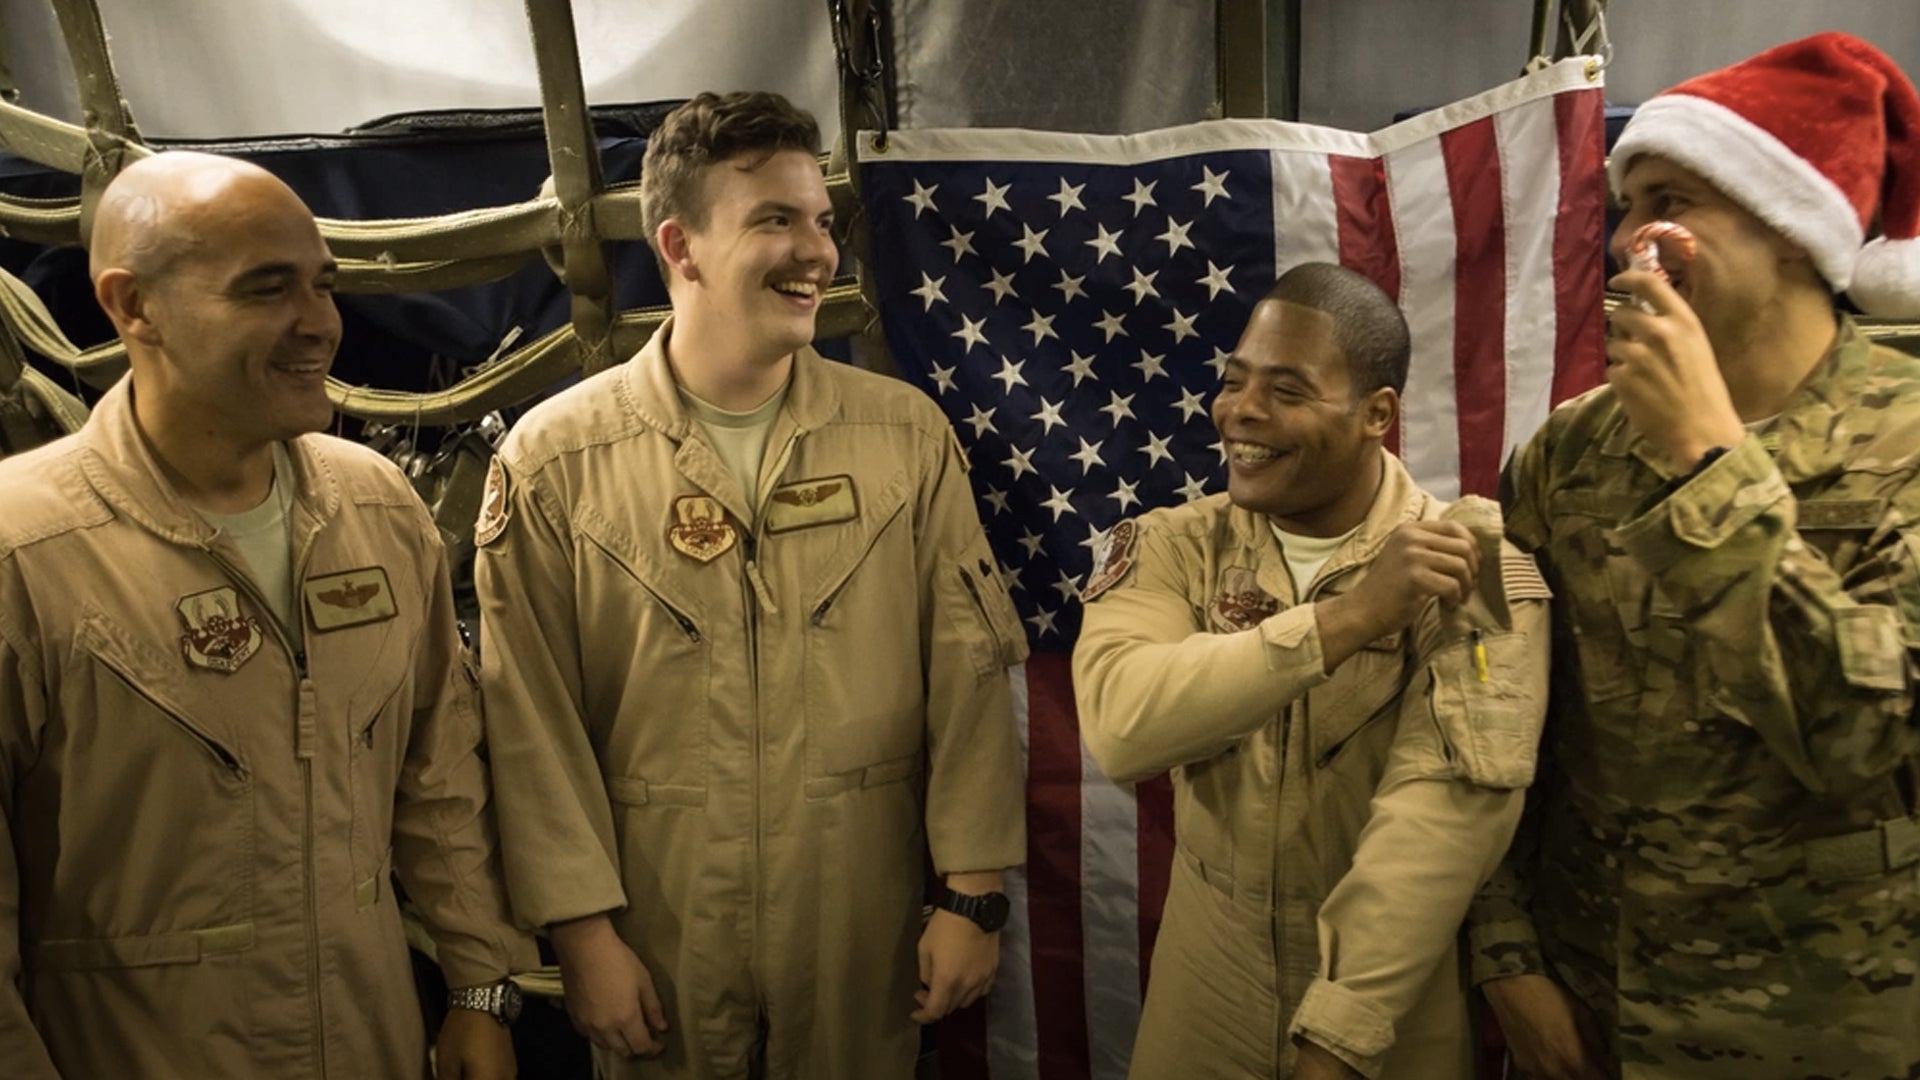 A 380th Air Expeditionary Wing KC-10 Extender aircrew laughs before a group photo after flying a sortie in support of Combined Joint Task Force-Operation Inherent Resolve at an undisclosed location in Southwest Asia, Dec. 25, 2016. (Senior Airman Tyler Woodward/U.S. Air Force)